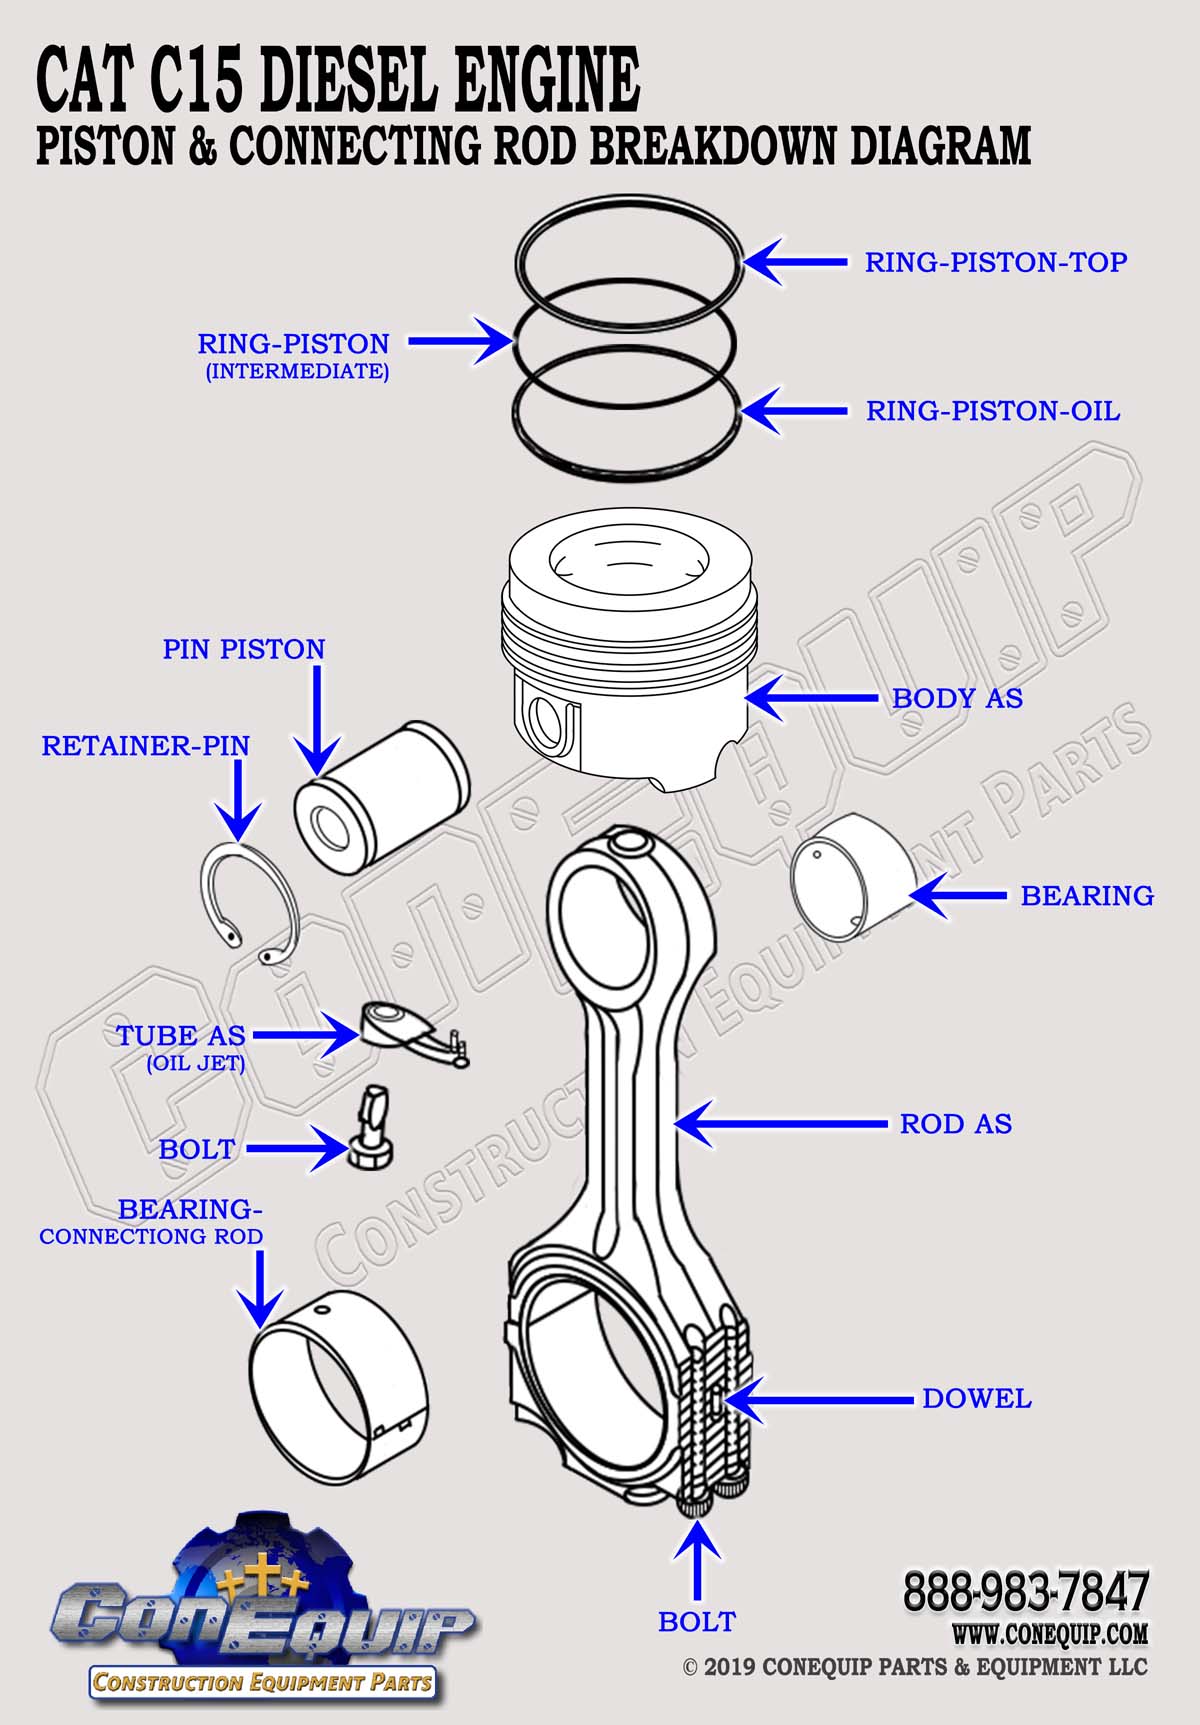 CAT C15 piston connecting rod assembly